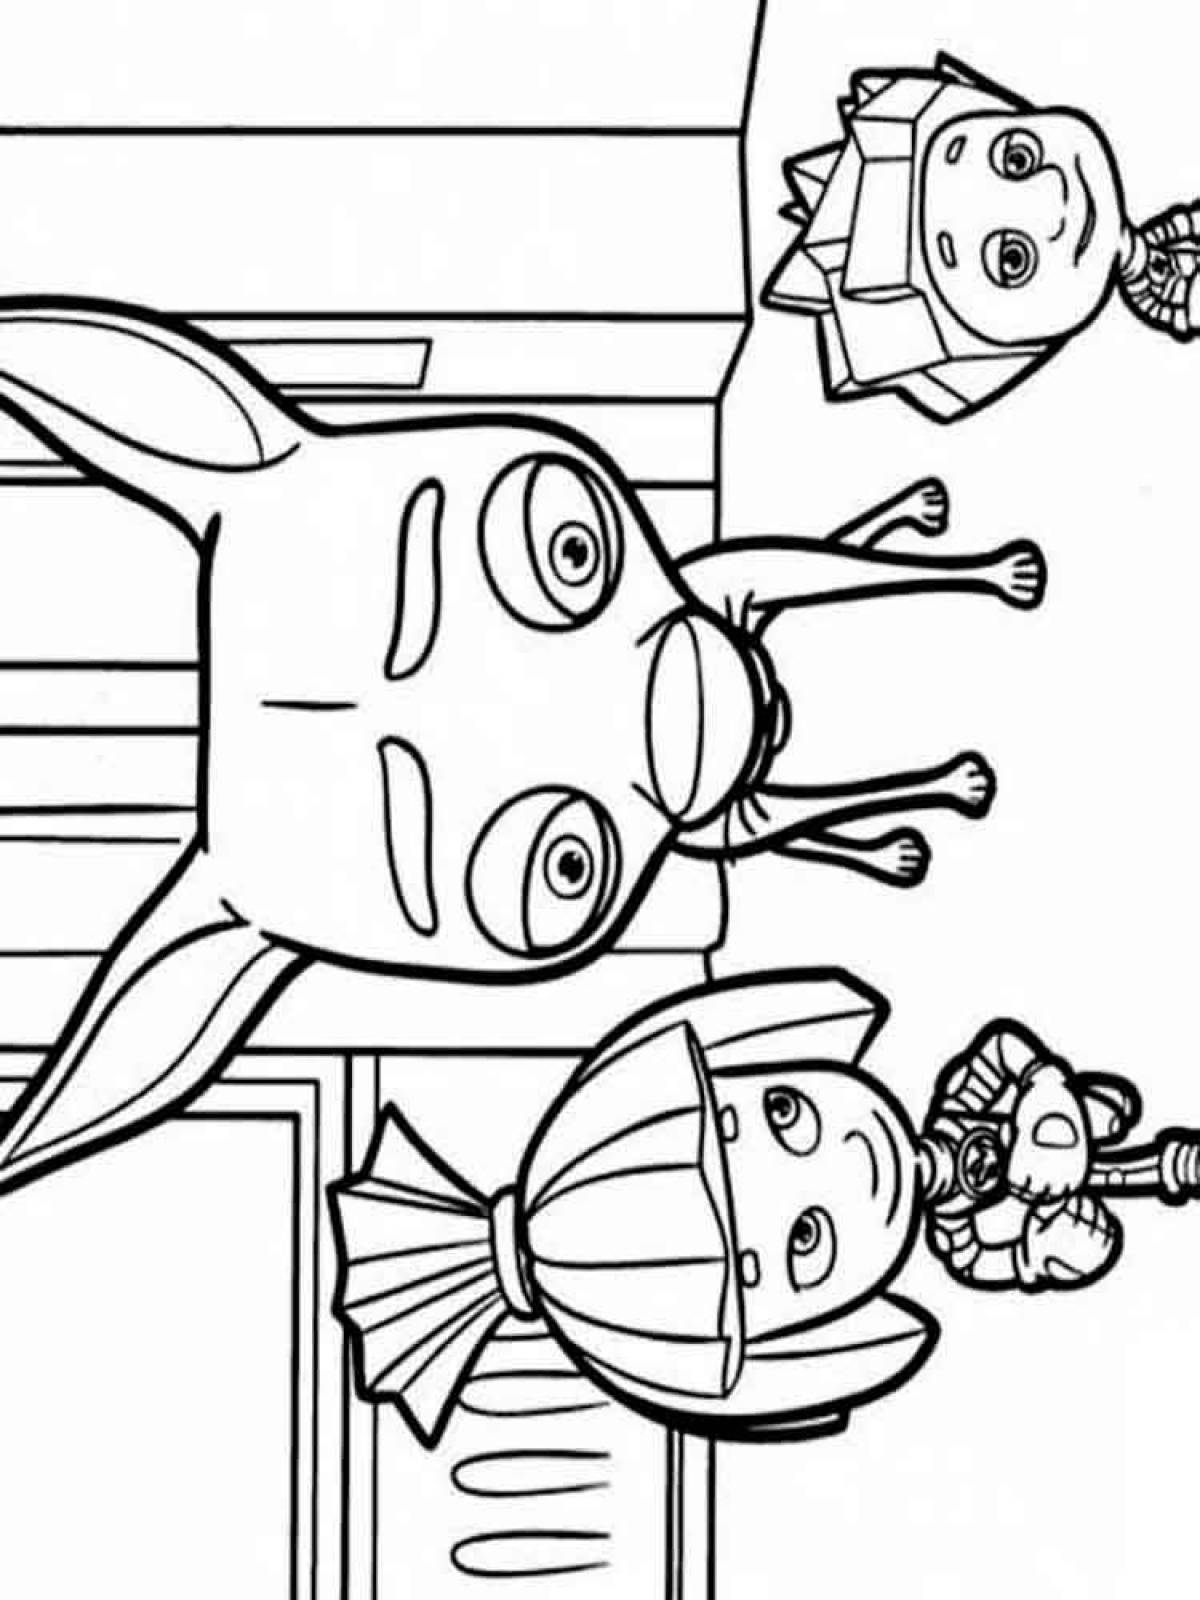 Adorable fixies coloring book for kids